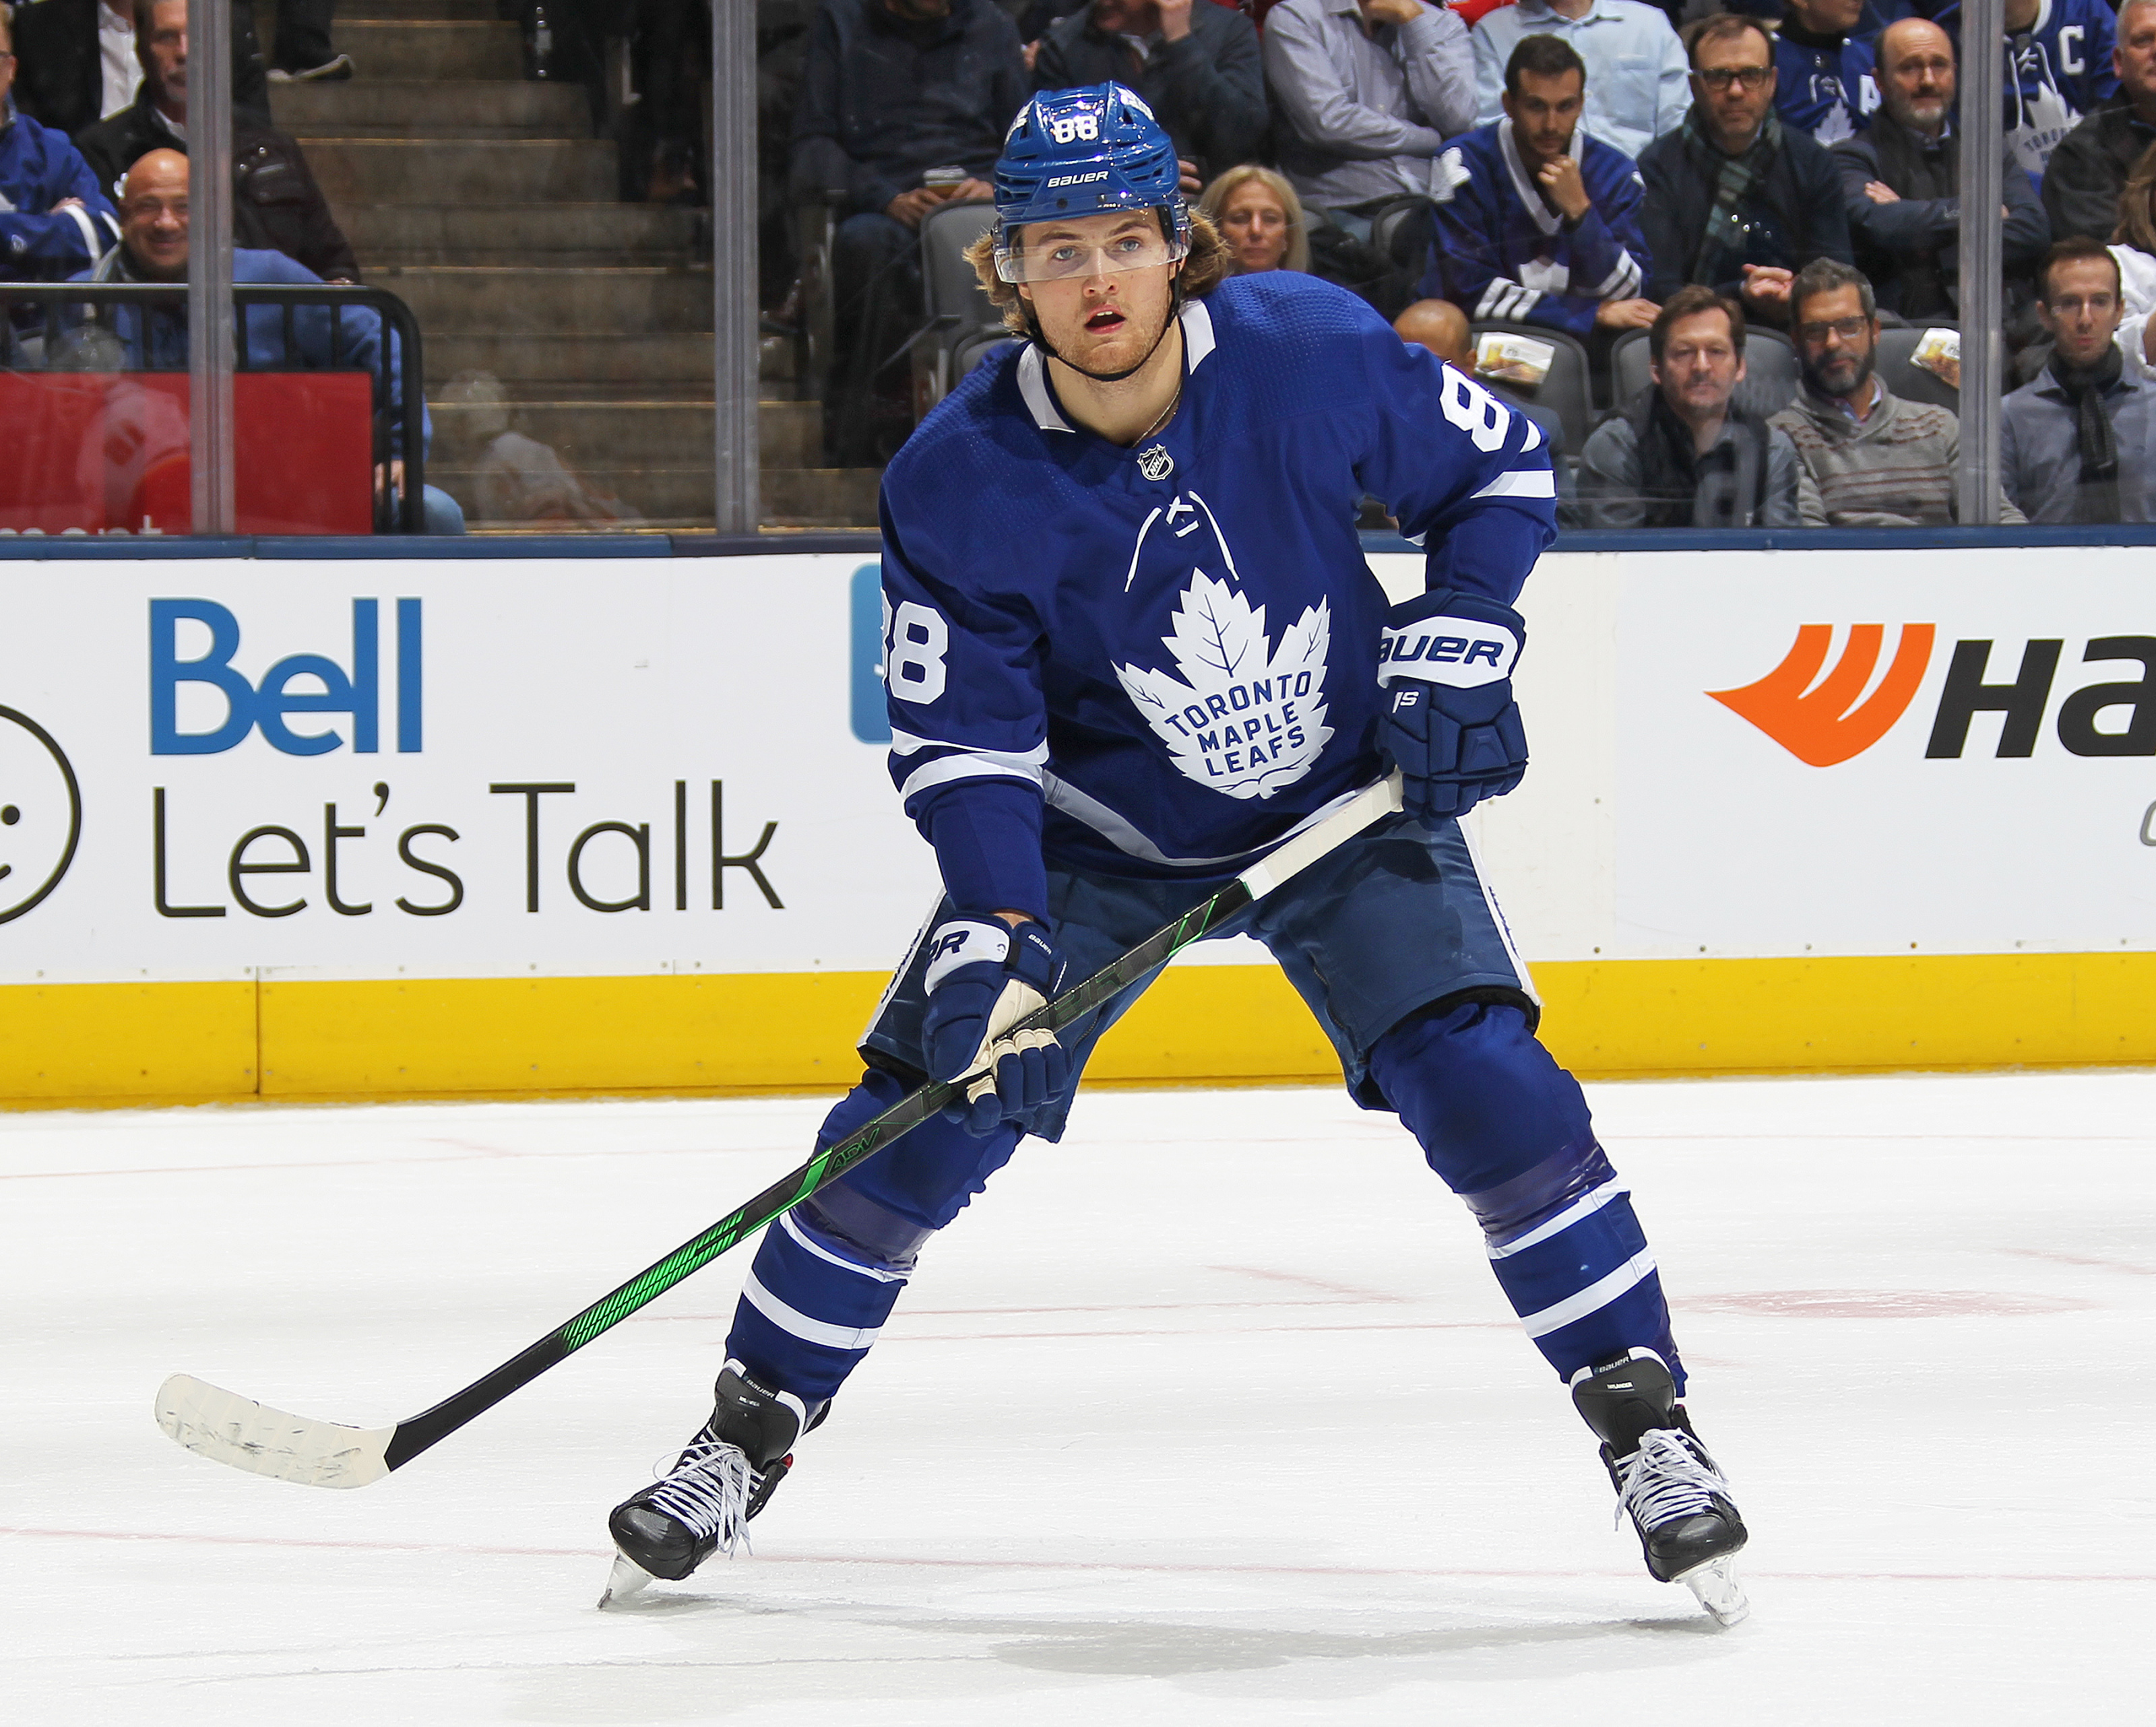 William Nylander lifts Maple Leafs over Wild in OT - The Rink Live   Comprehensive coverage of youth, junior, high school and college hockey